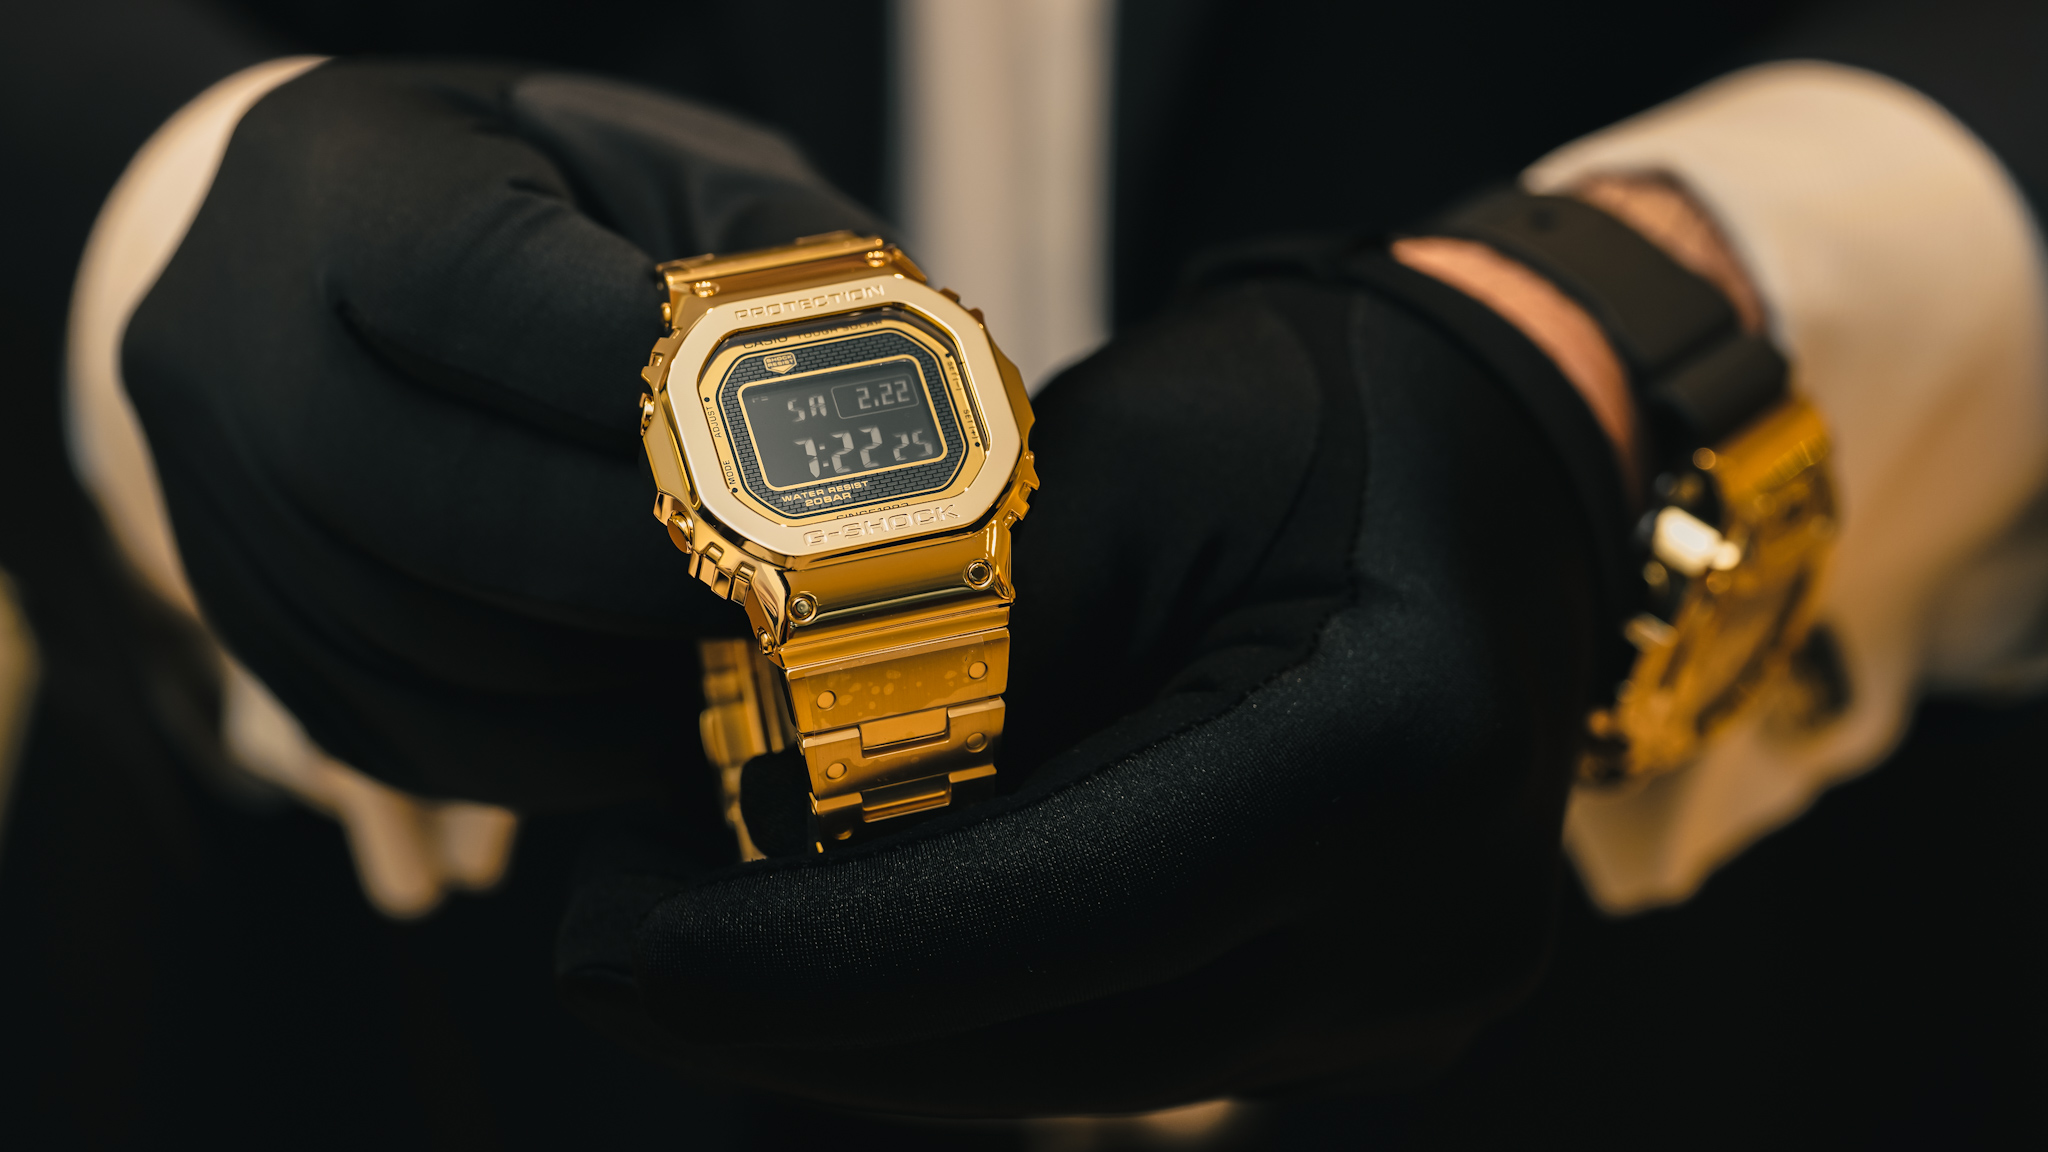 Unboxing the Solid Gold G-Shock G-D5000-9JR ‘Dream Project’ at Topper Jewelers